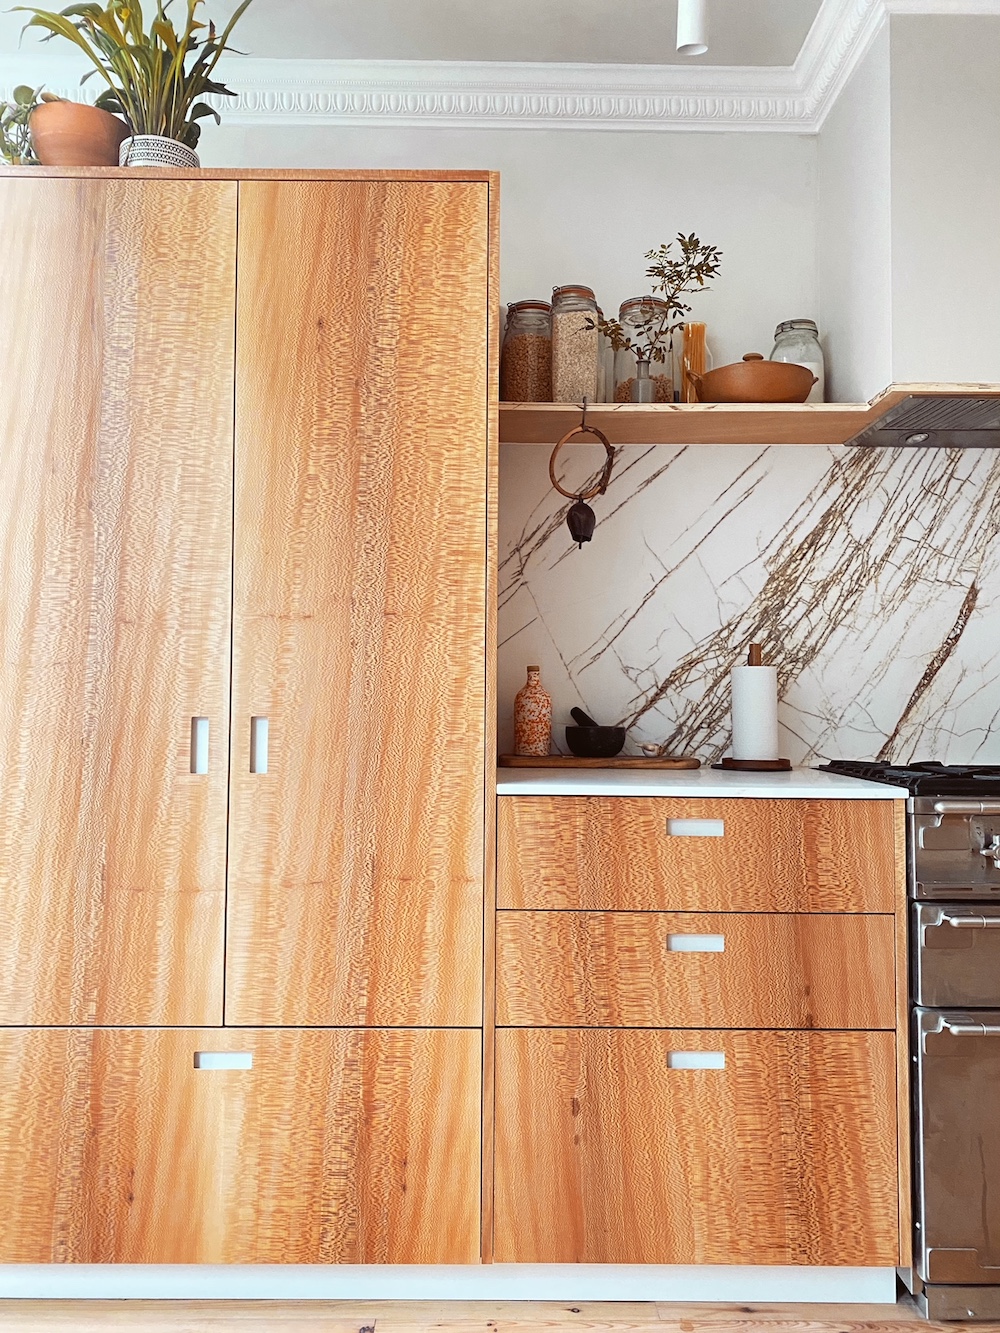 Wood Pantry and marble backsplash in kitchen